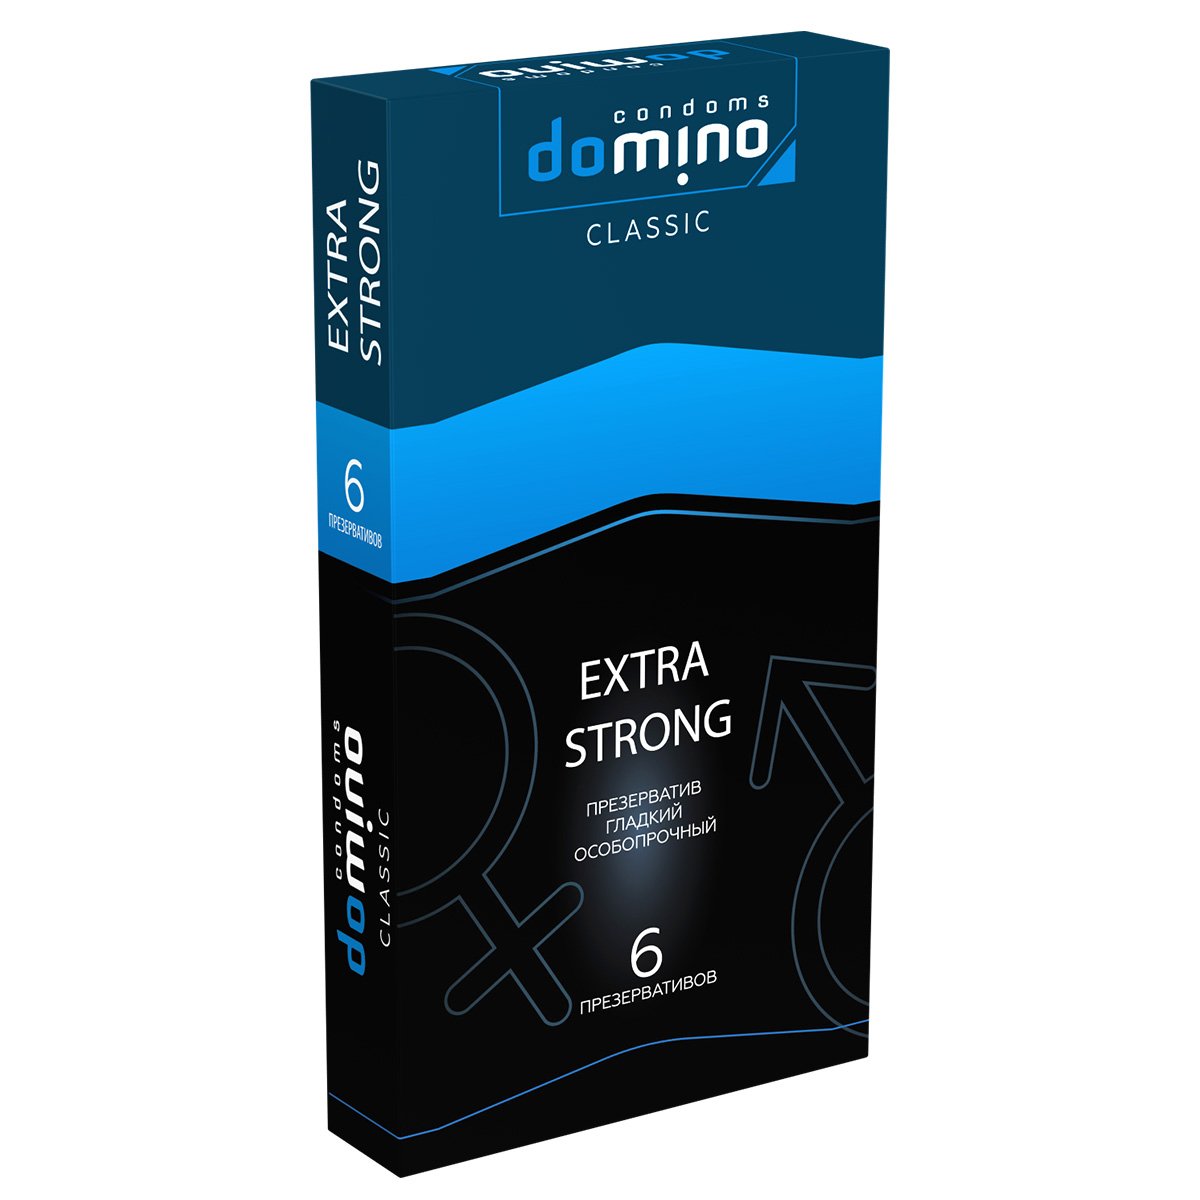  DOMINO CLASSIC EXTRA STRONG 6 